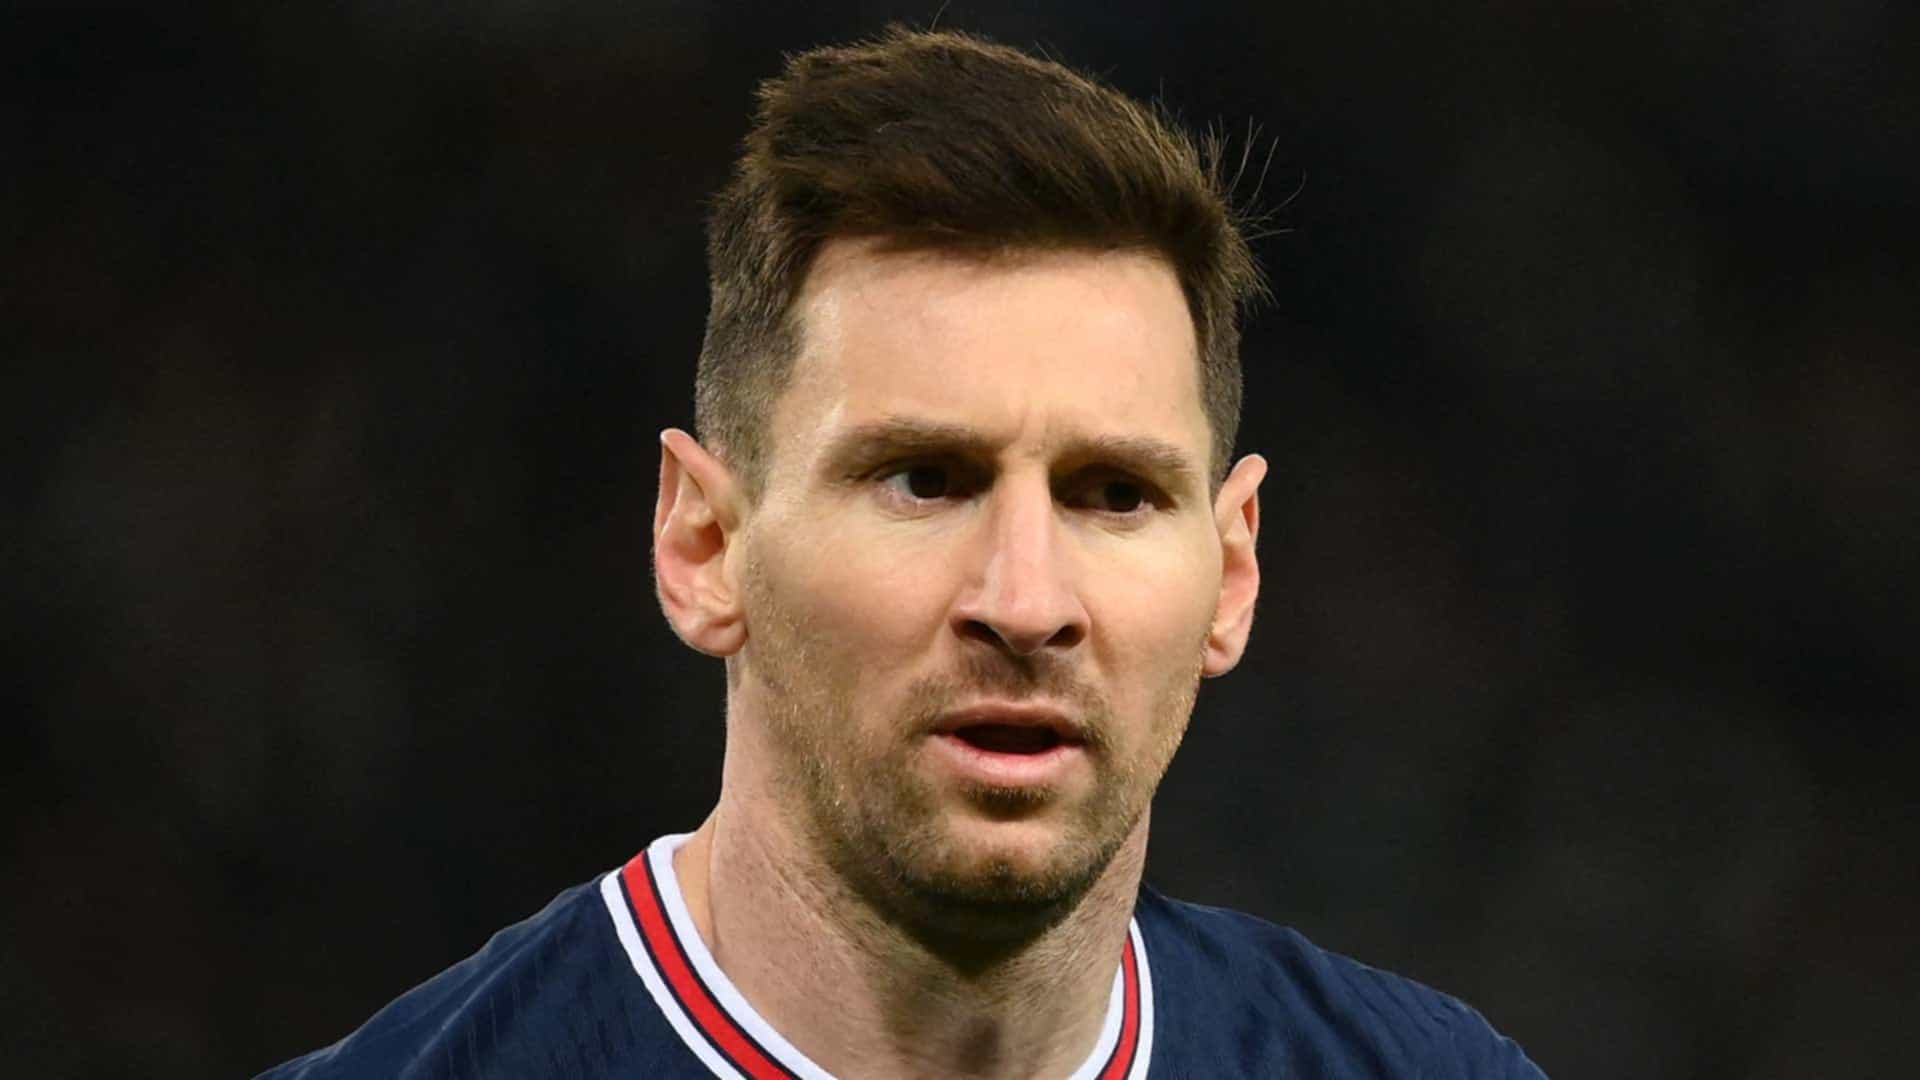 PSG's Lionel Messi out with COVID-19: Matches he could miss in January